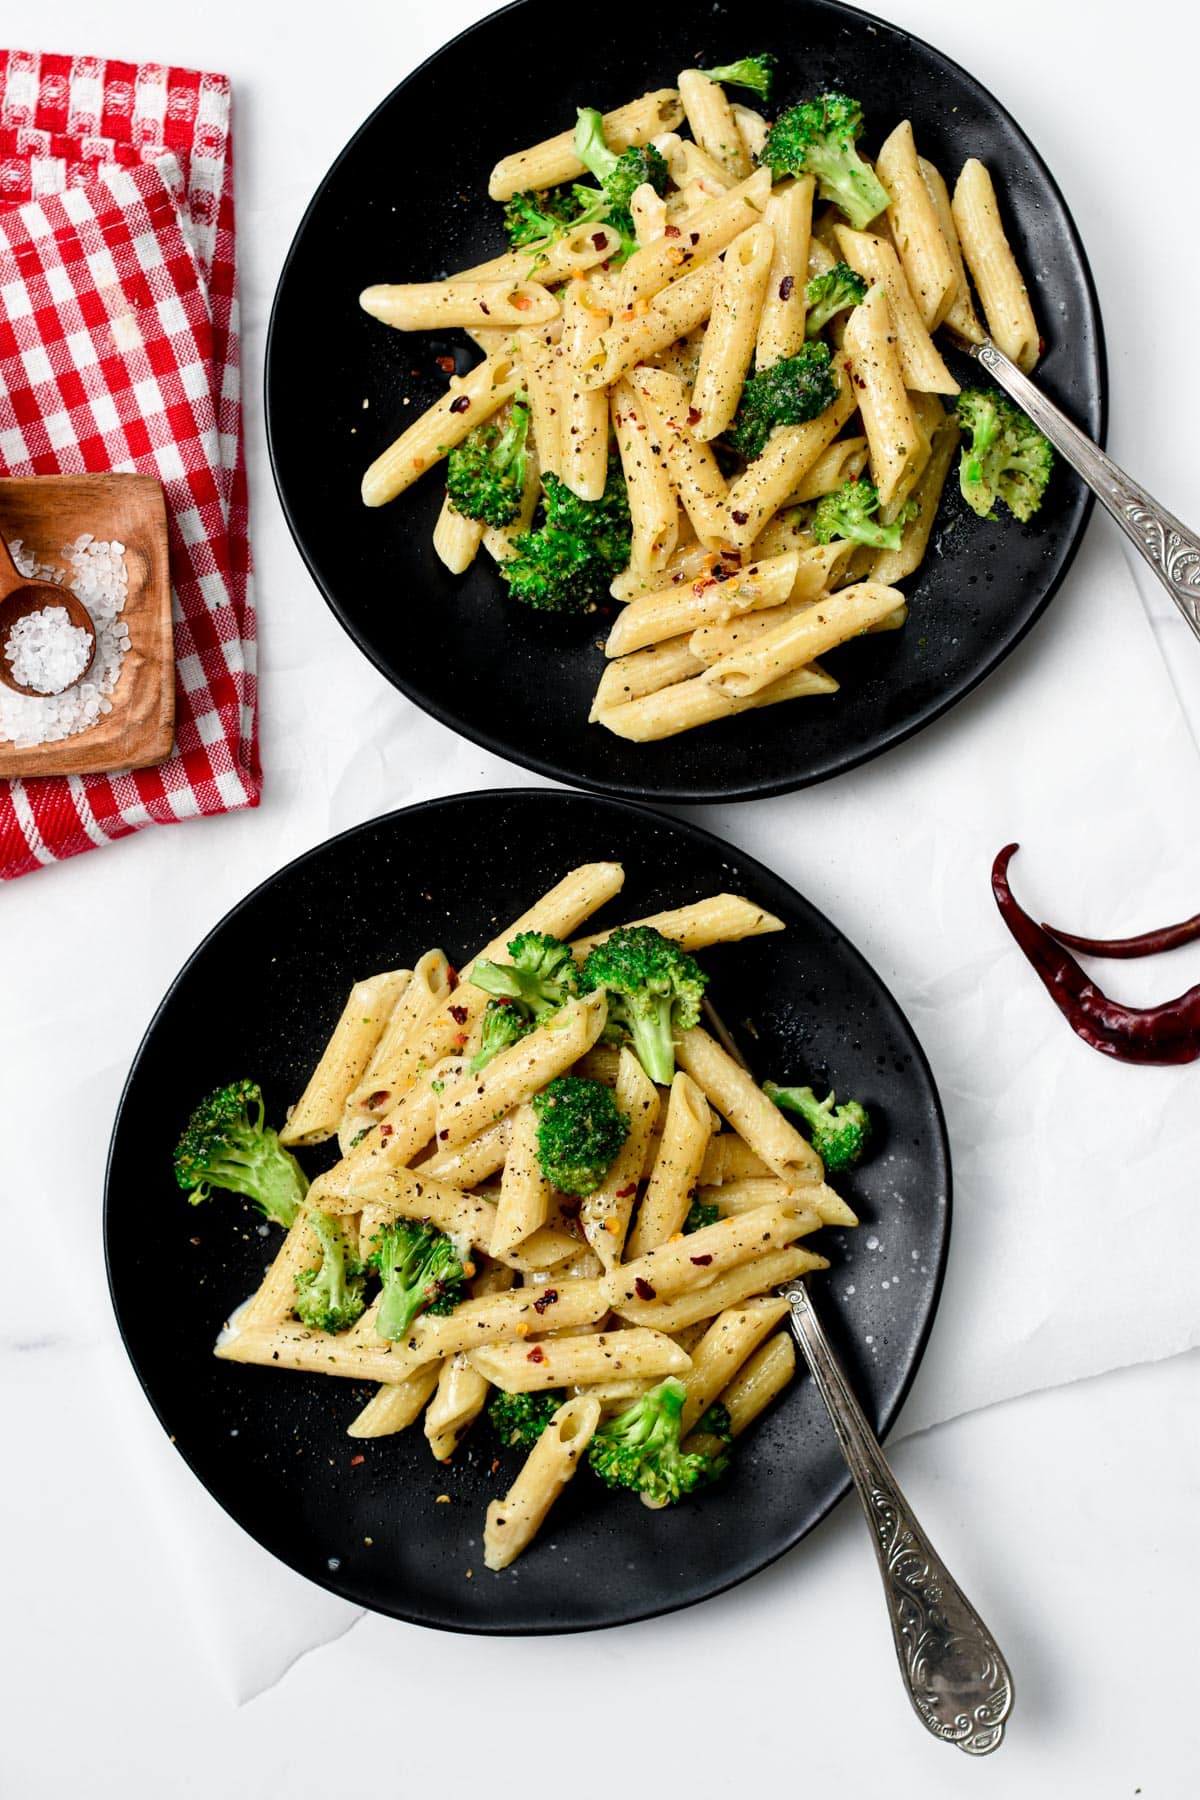 Vegan Broccoli Pasta in two small black plates with forks.